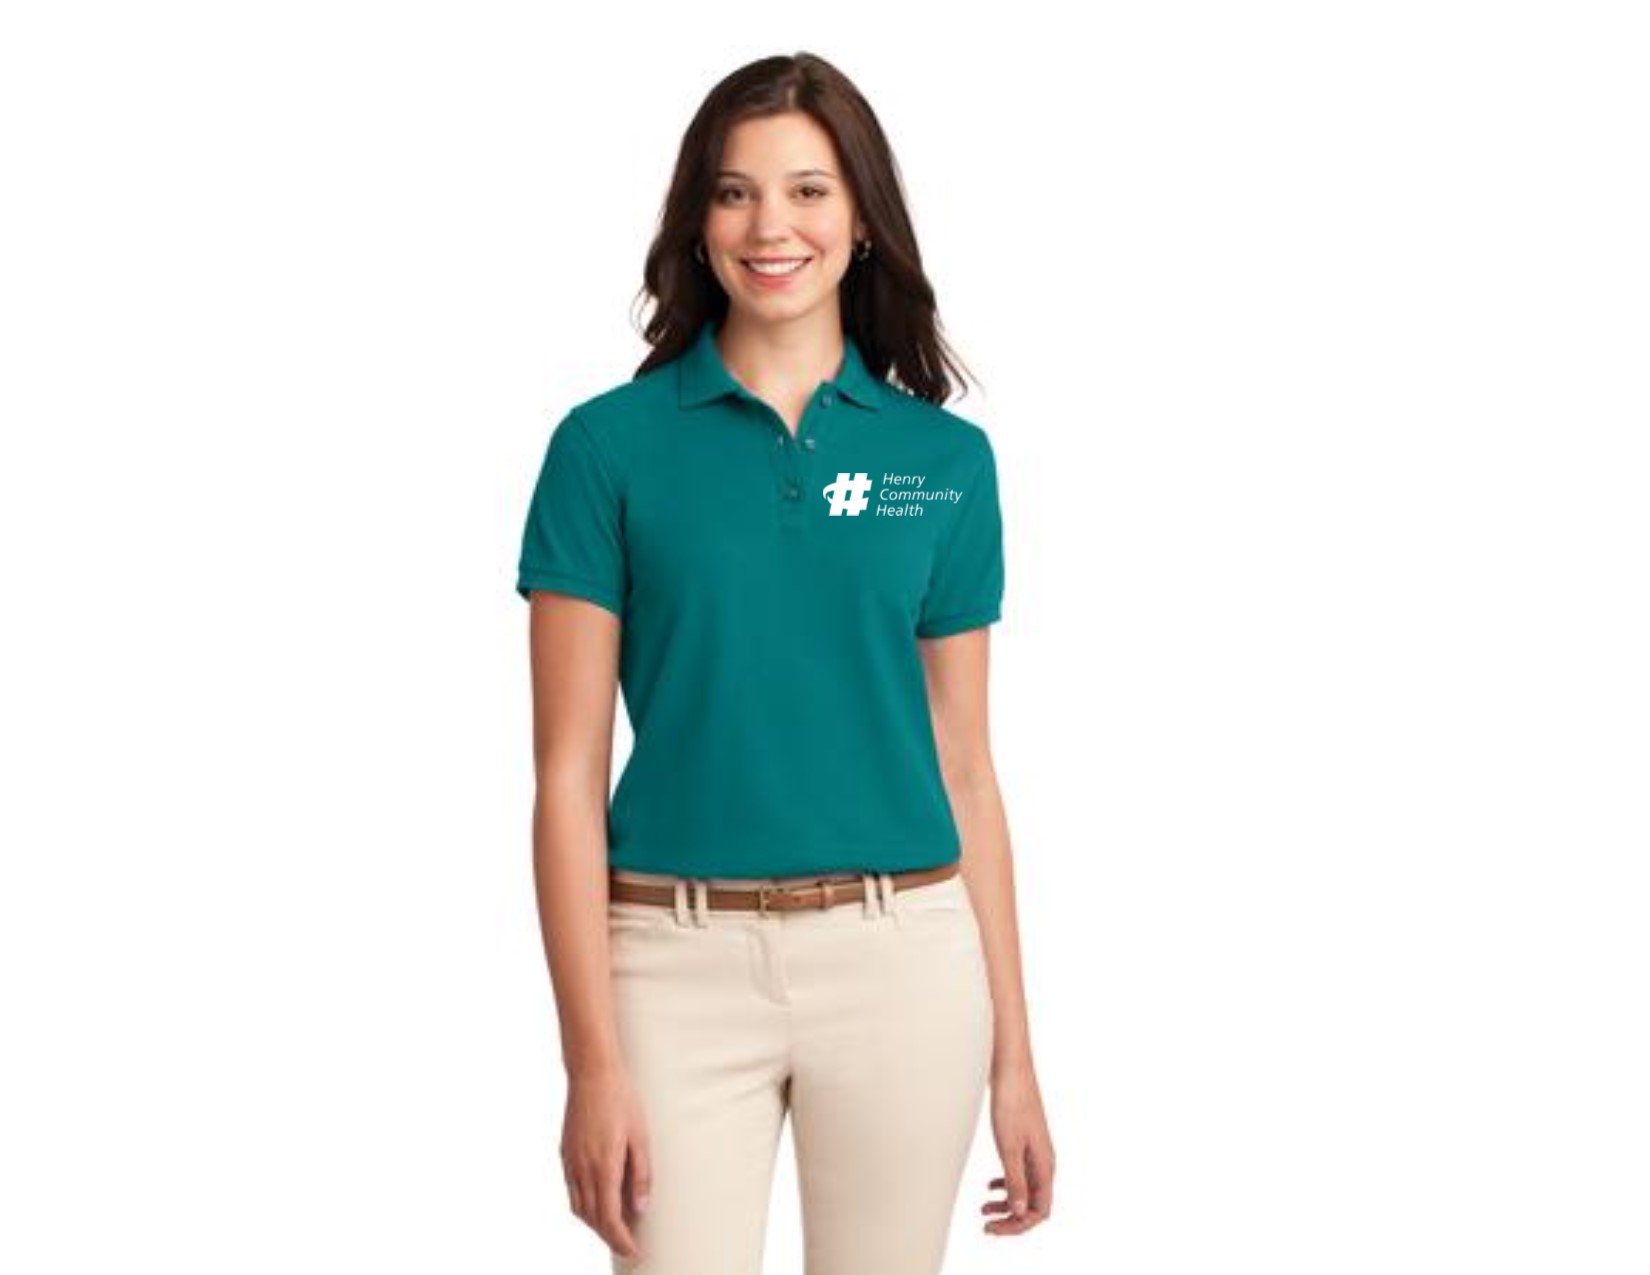 port authority ladies silk touch polo l500